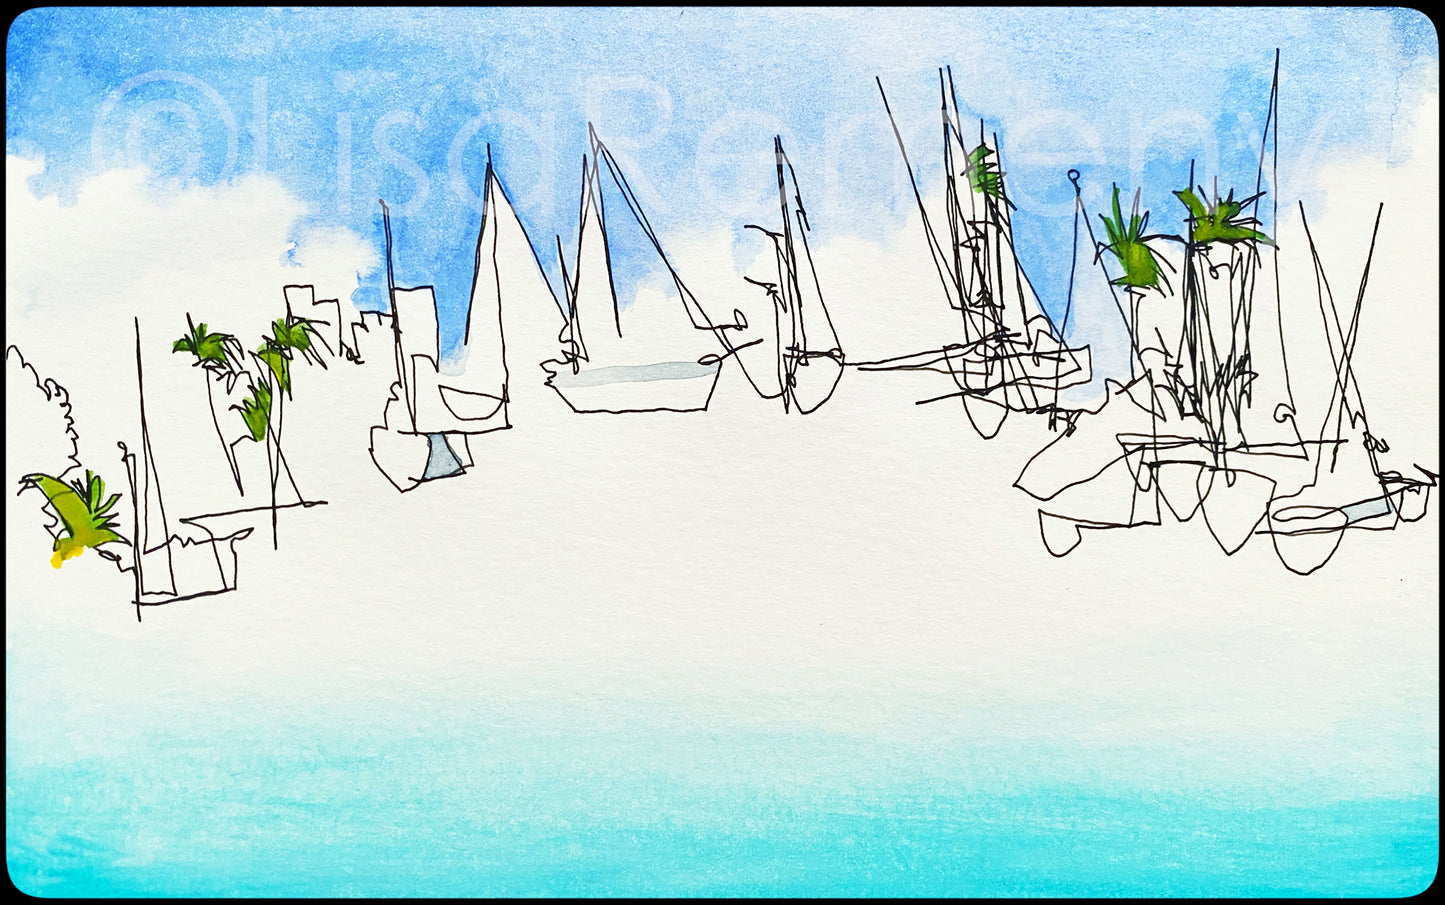 Watercolor & Ink on Paper - The Anchorage, Coconut Grove, Florida